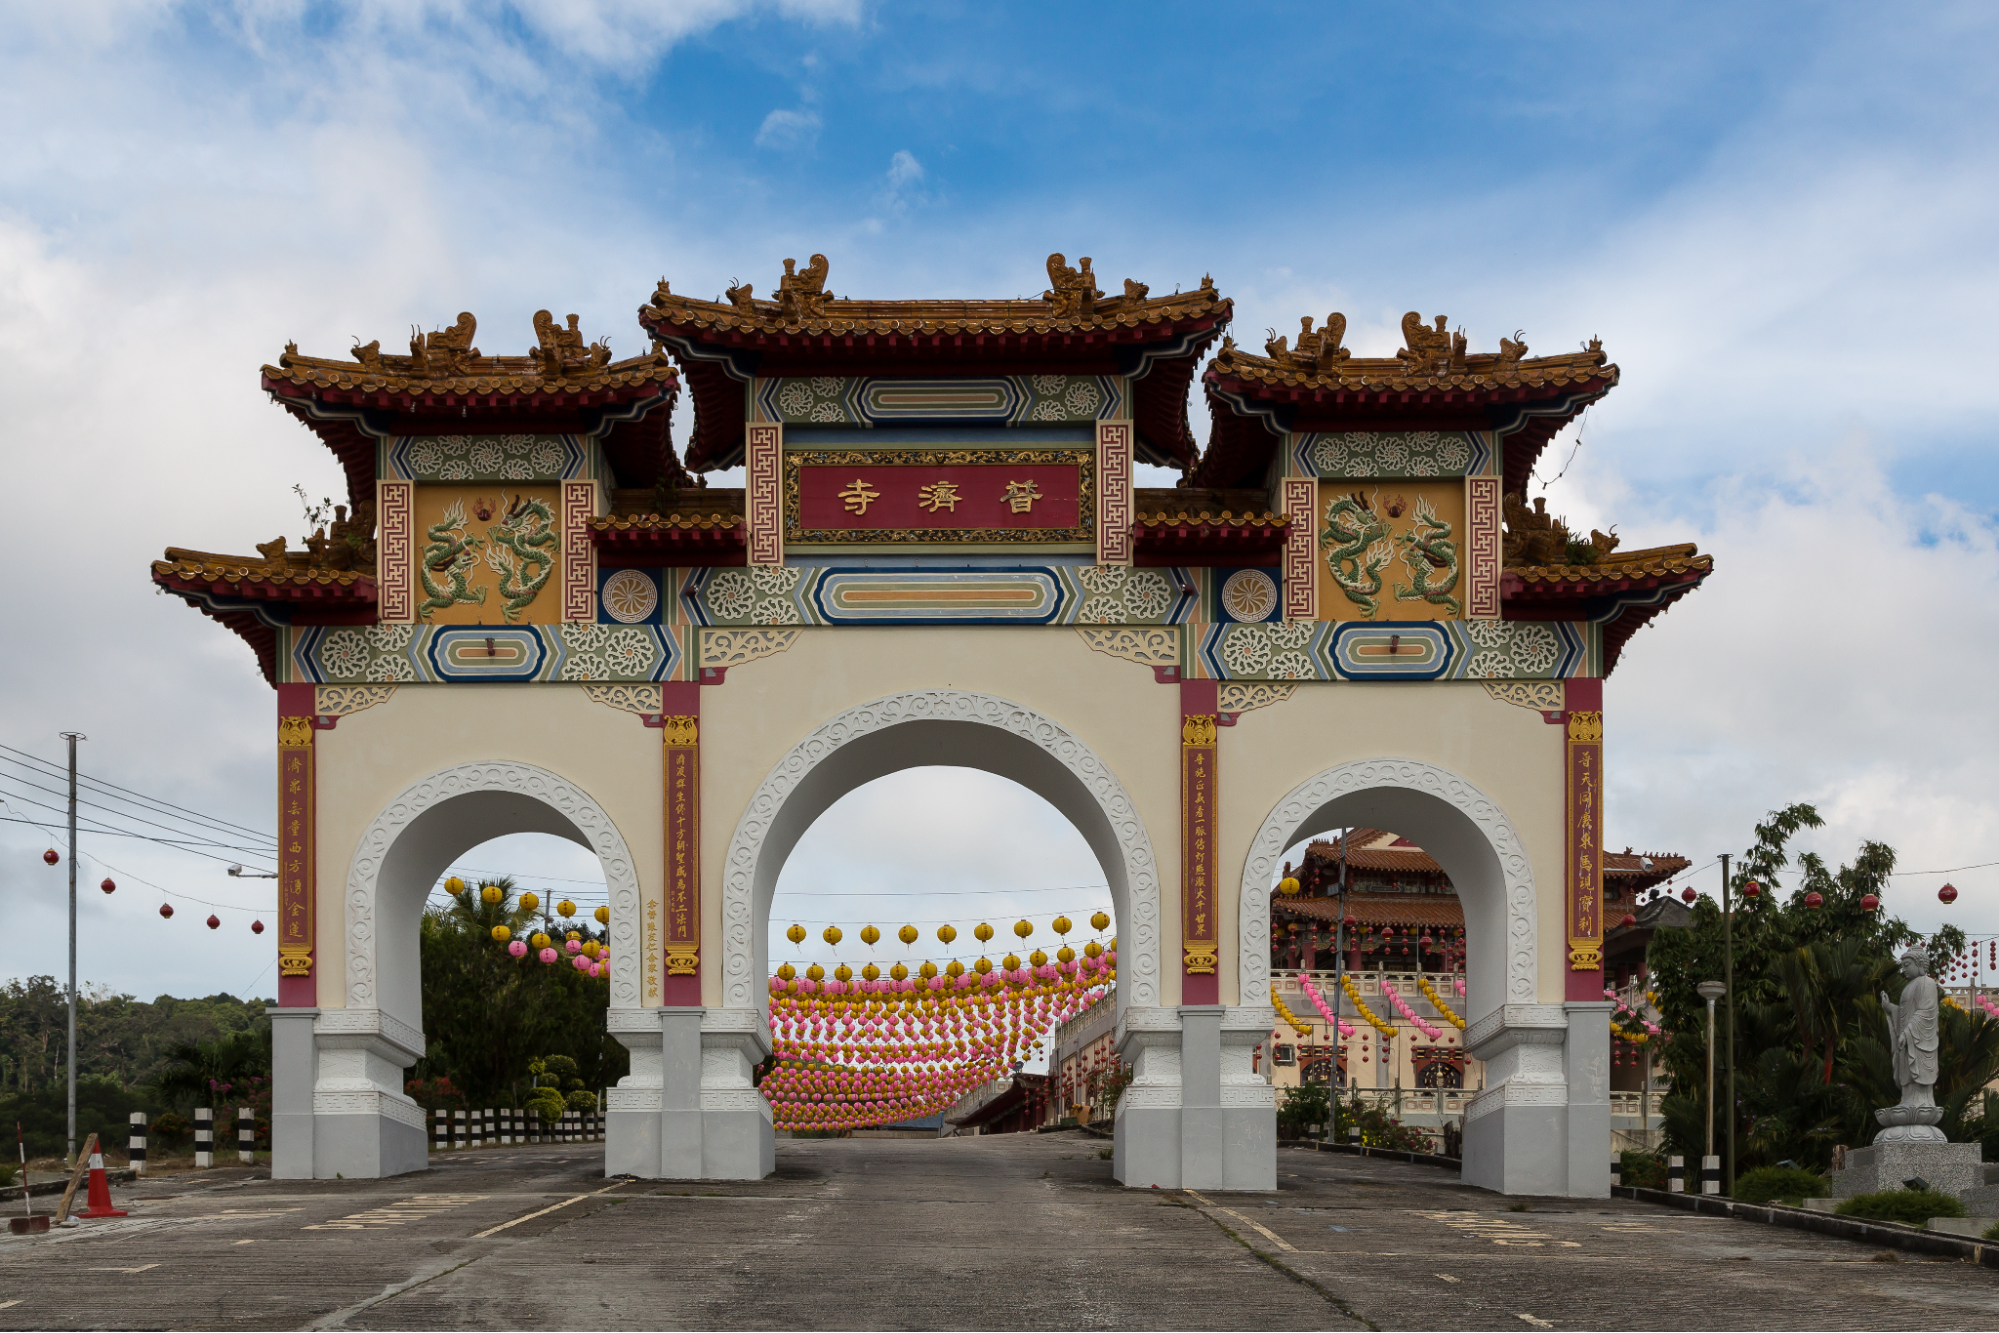 Outside the Puu Jih Shih Temple, a tourist attraction in Sabah